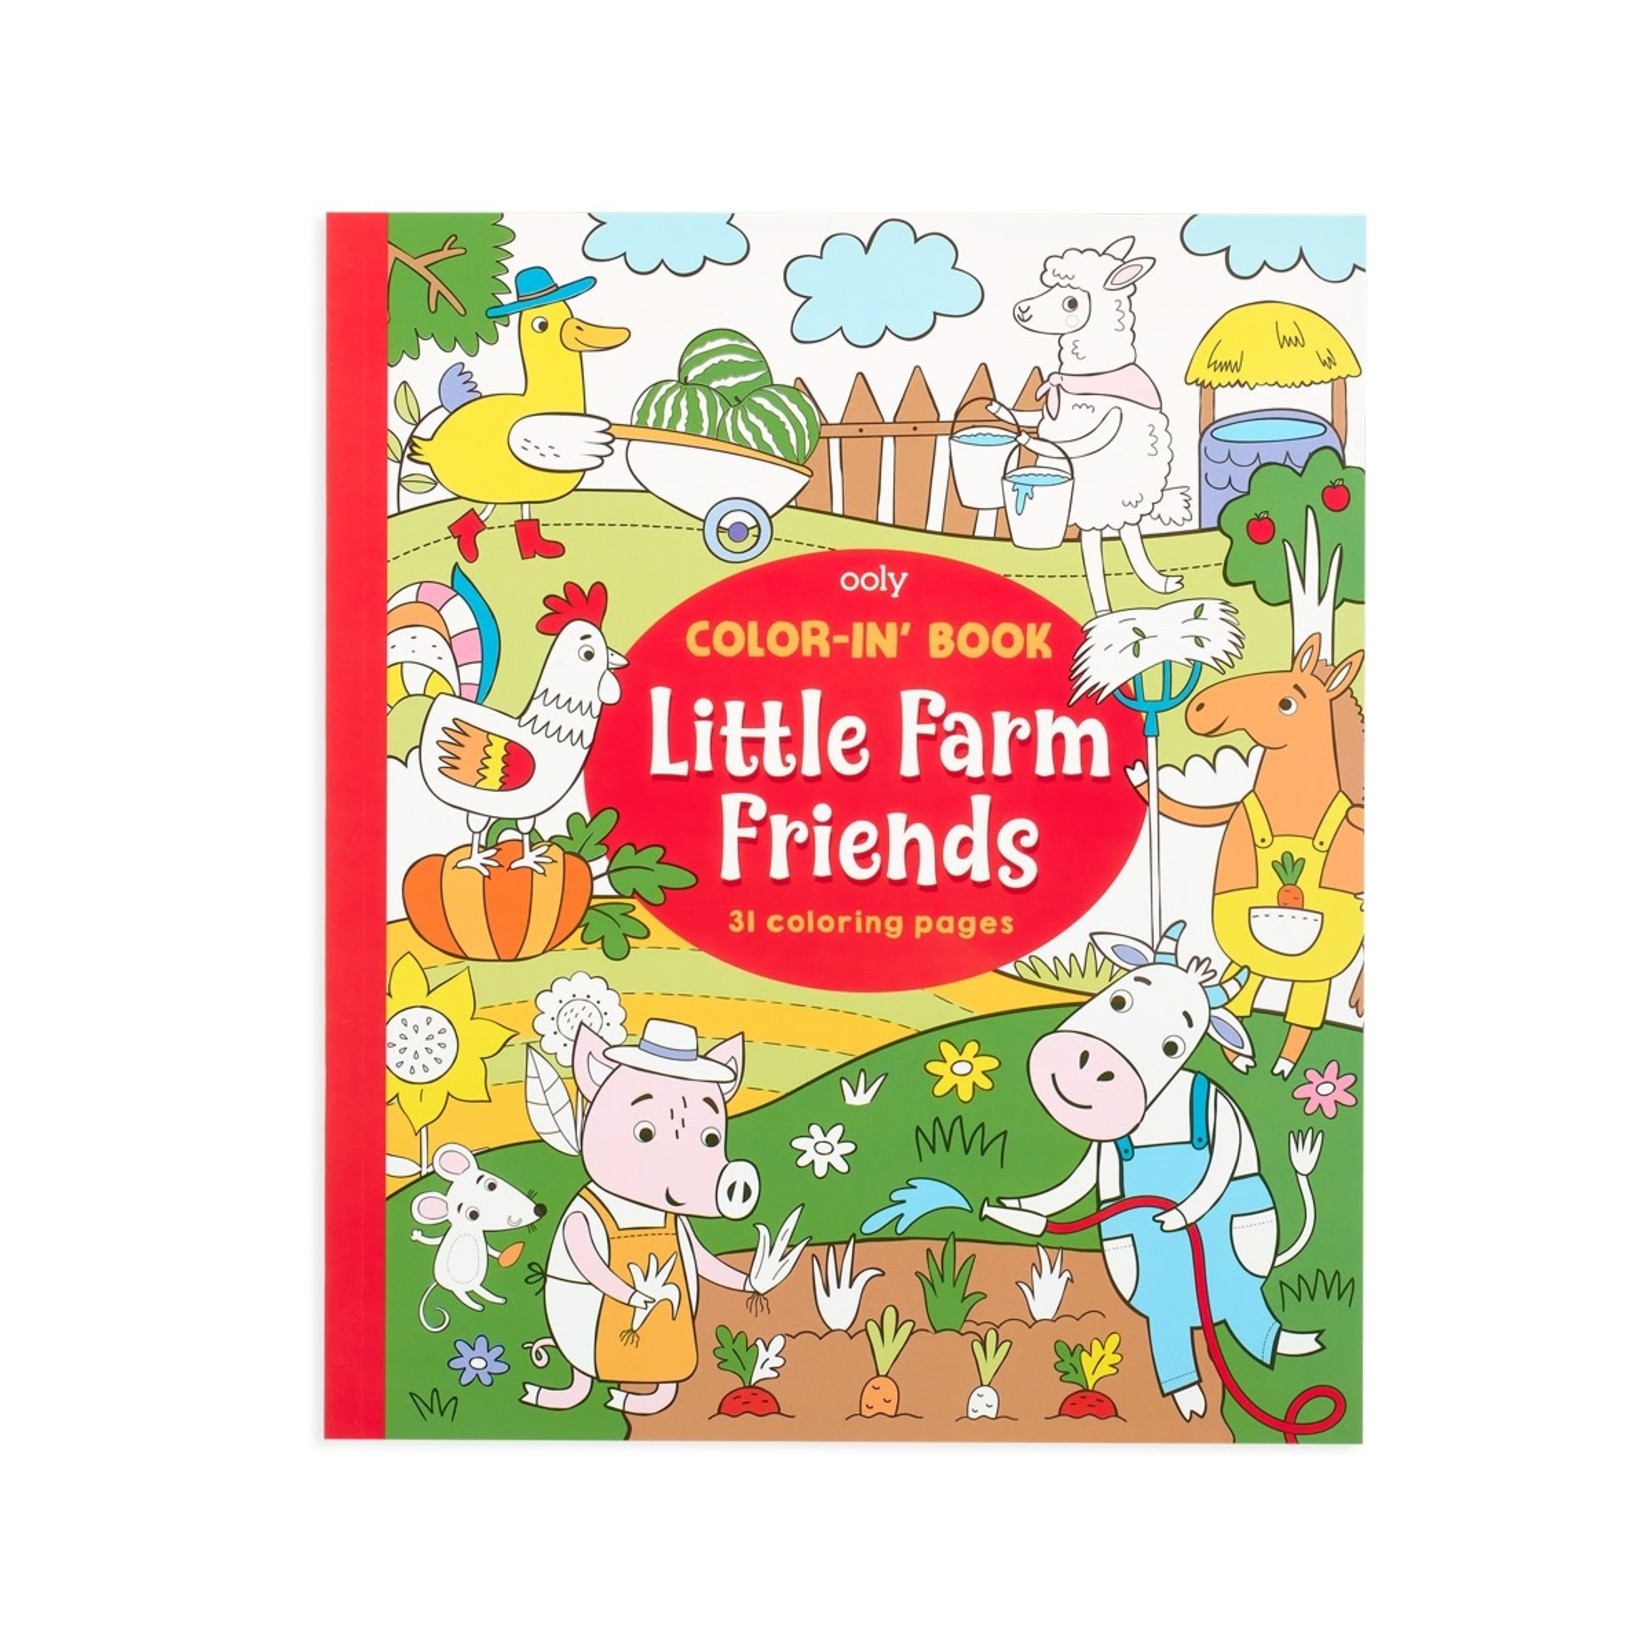 Ooly Color-in' Book: Little Farm Friends (8" x 10")